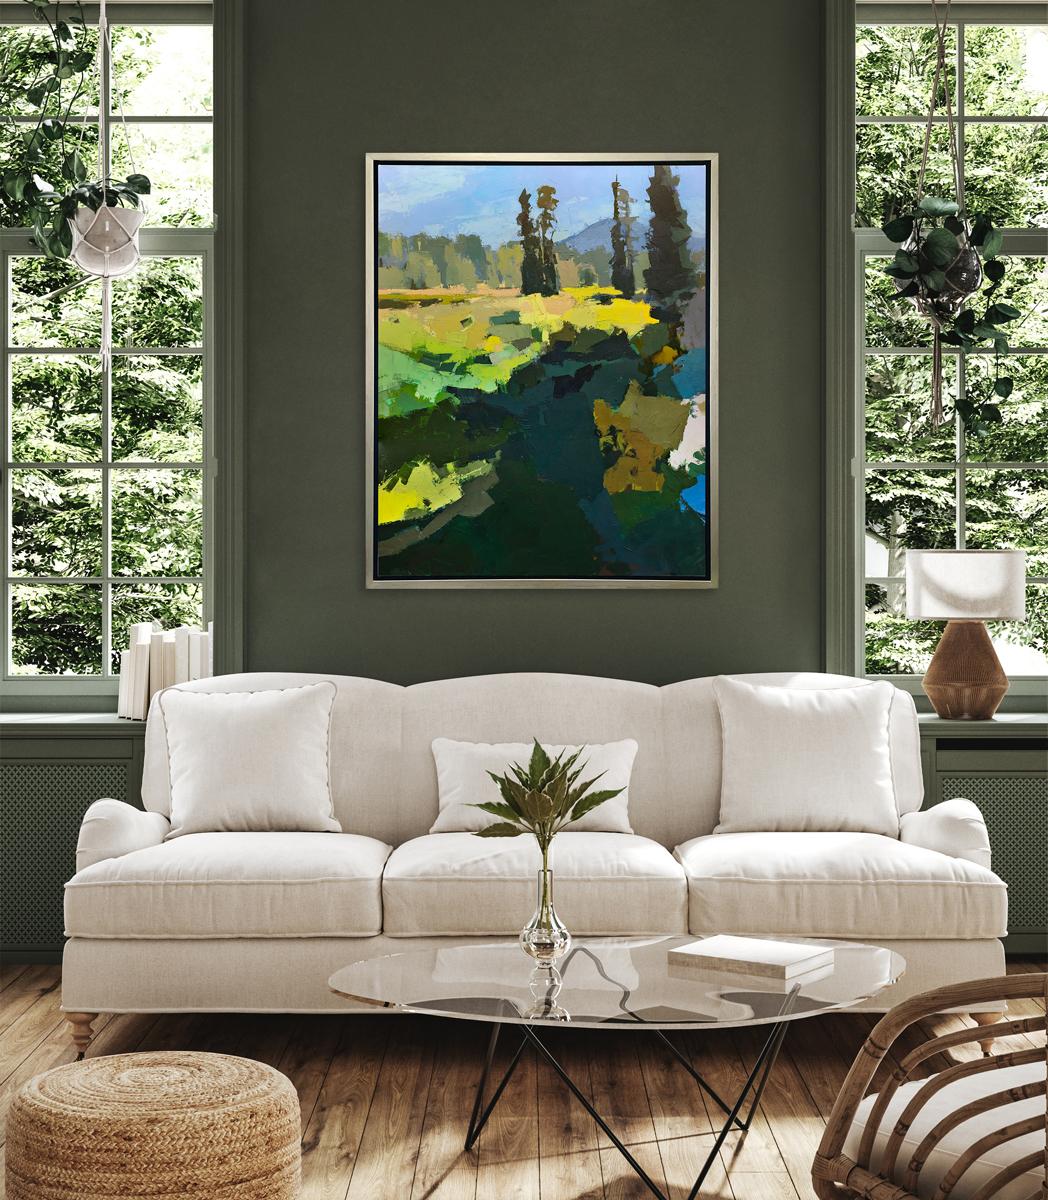 This Limited Edition giclee landscape print by Bri Custer is an edition size of 195. It features a blue and green palette with vibrant yellow accents, and captures an abstracted landscape with large trees in the distance. Printed on canvas, this